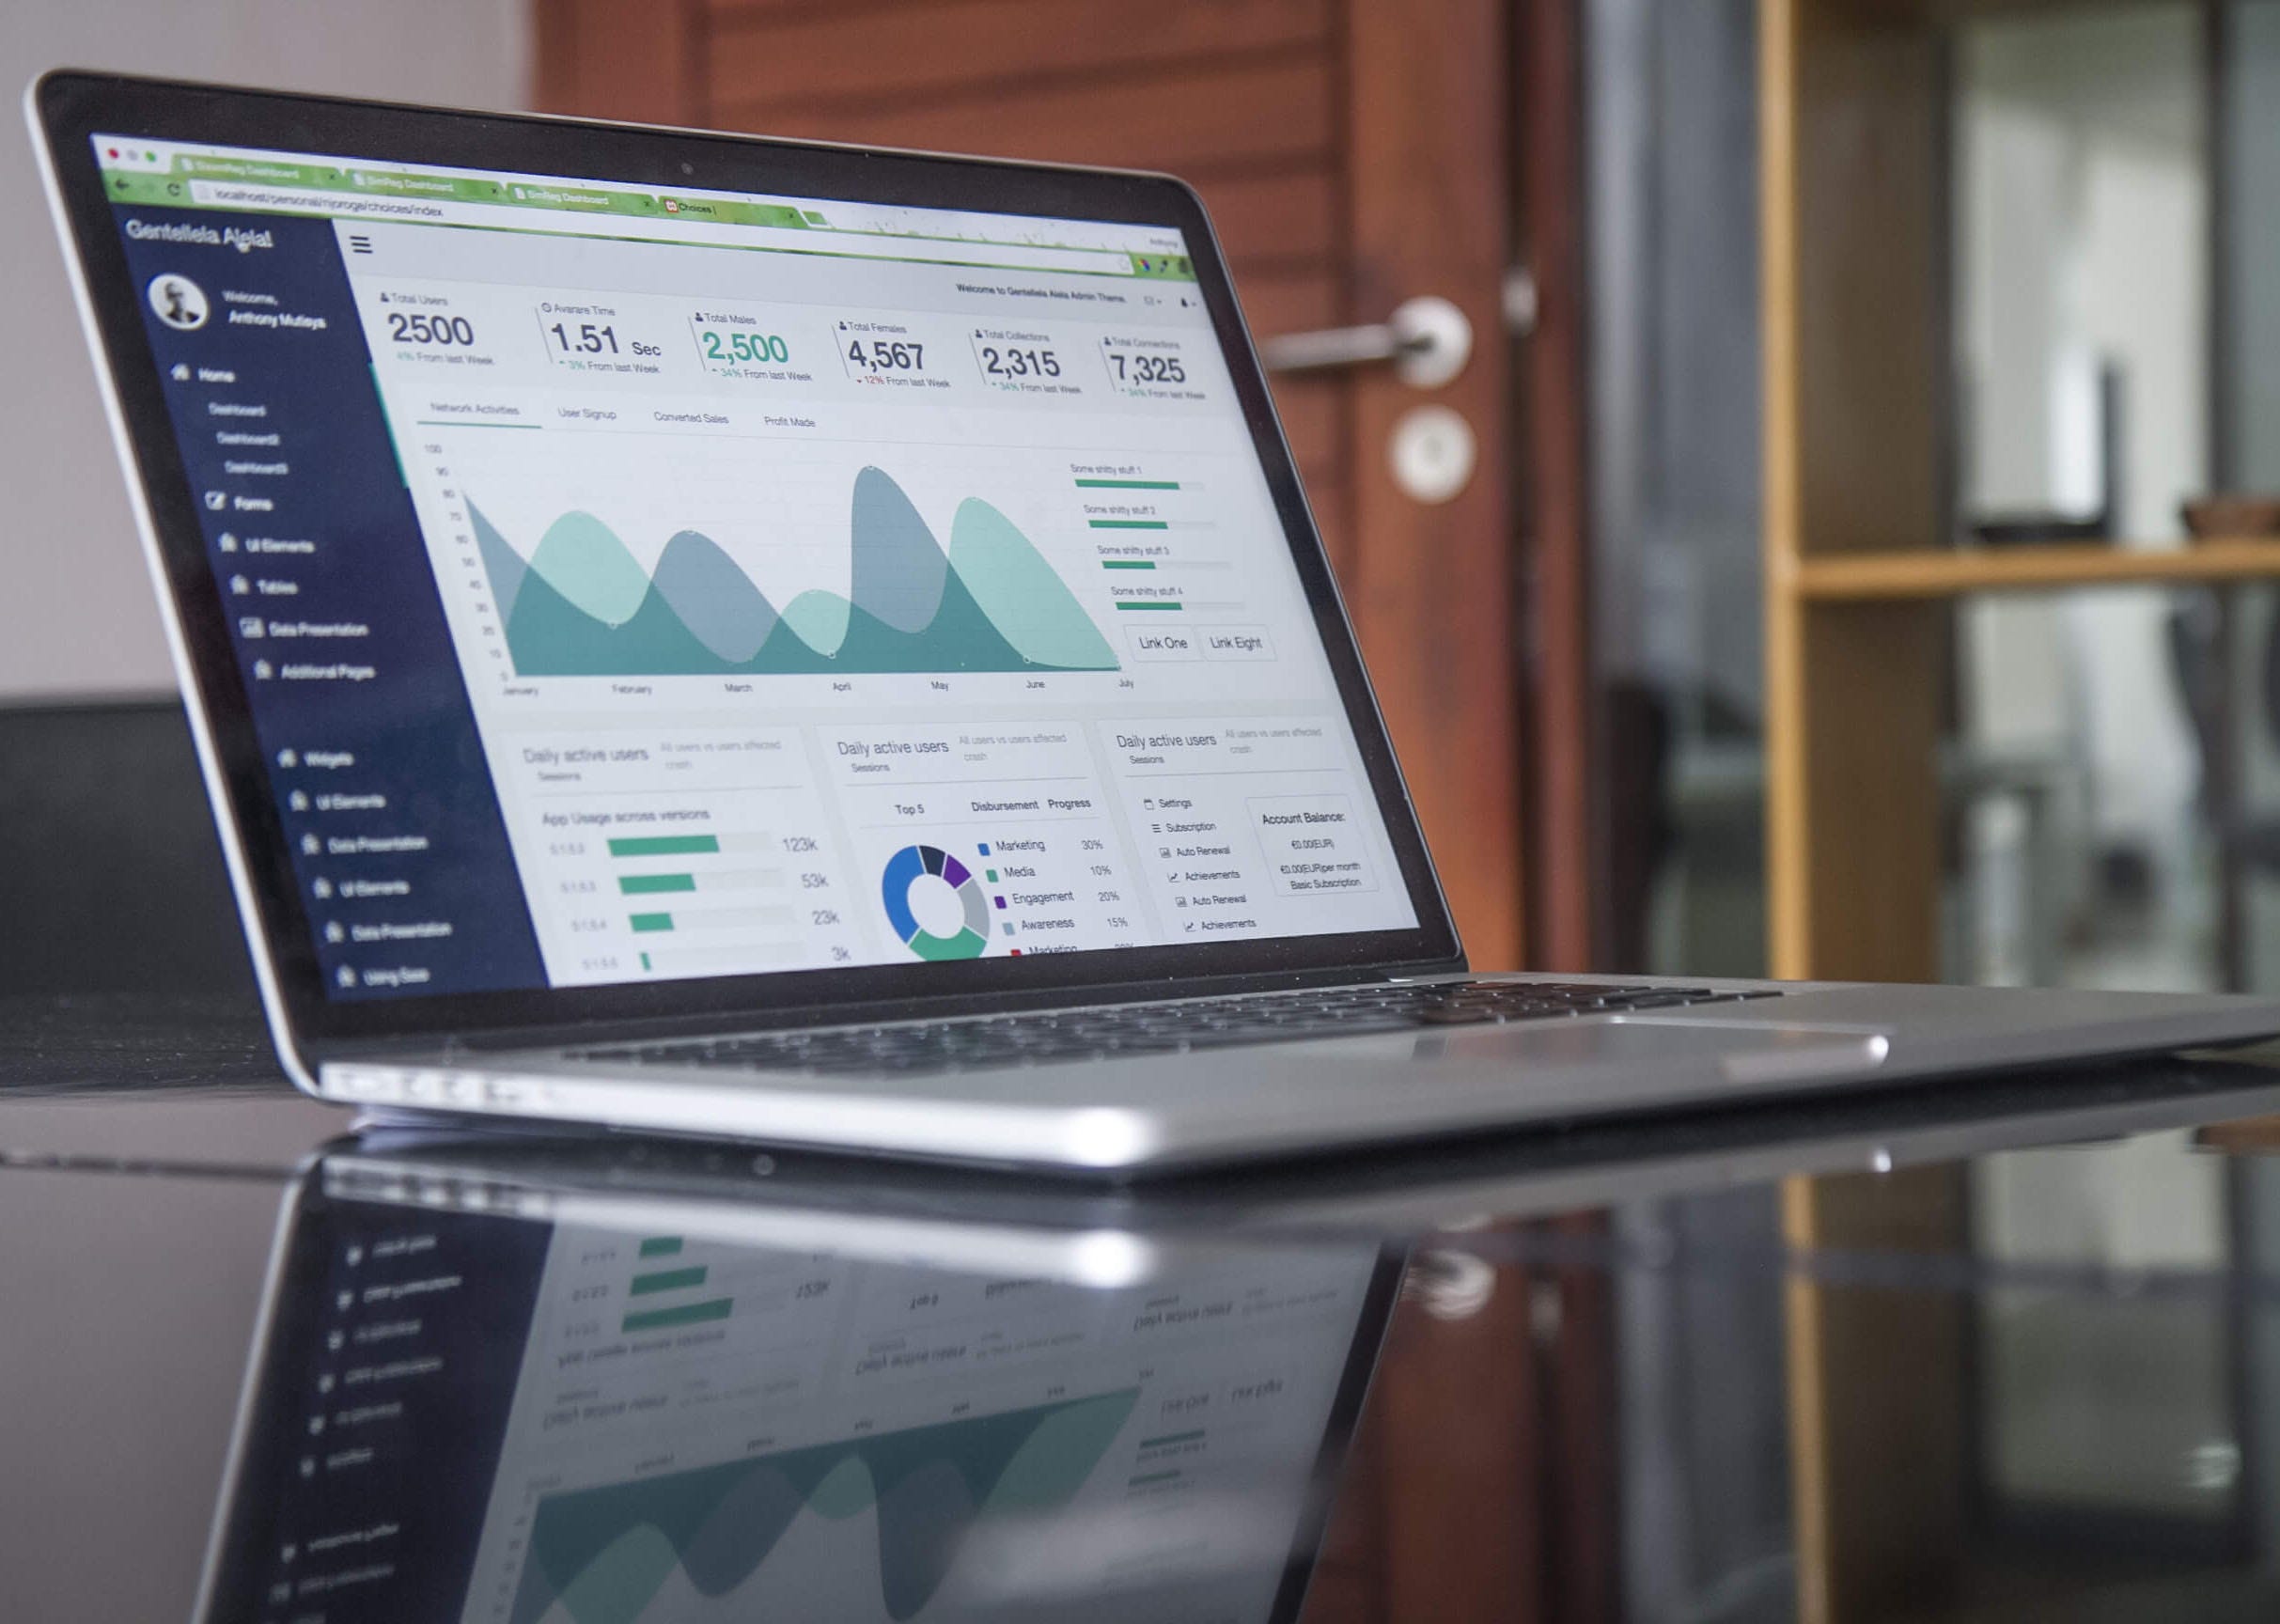 “Charts with statistics on the screen of a laptop on a glossy surface” by <a href="https://unsplash.com/@kmuza?utm_source=medium&amp;utm_medium=referral">Carlos Muza</a> on <a href="https://unsplash.com?utm_source=medium&amp;utm_medium=referral">Unsplash</a>